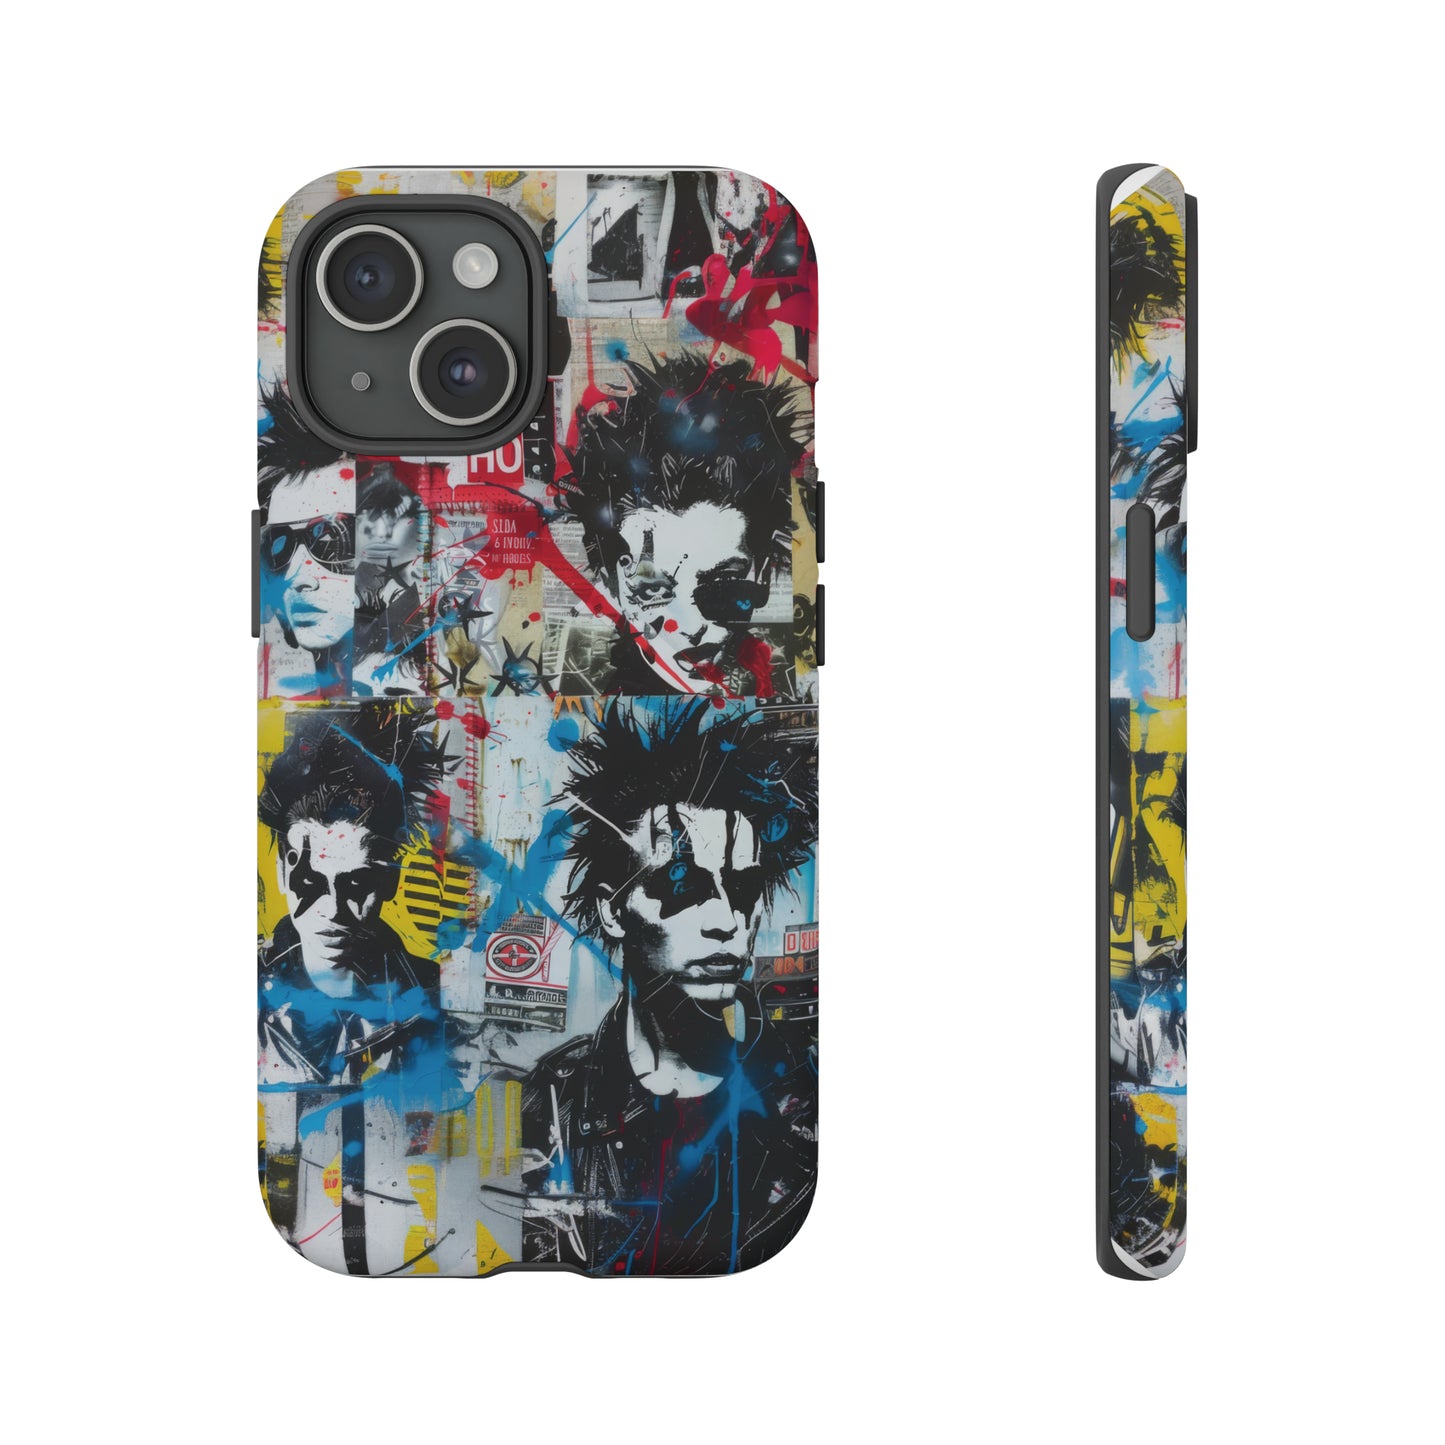 Urban Punk Graffiti Art Phone Case, Durable Protective Cover for Latest Models, Eye-Catching Street Style Accessory, Tough Cases